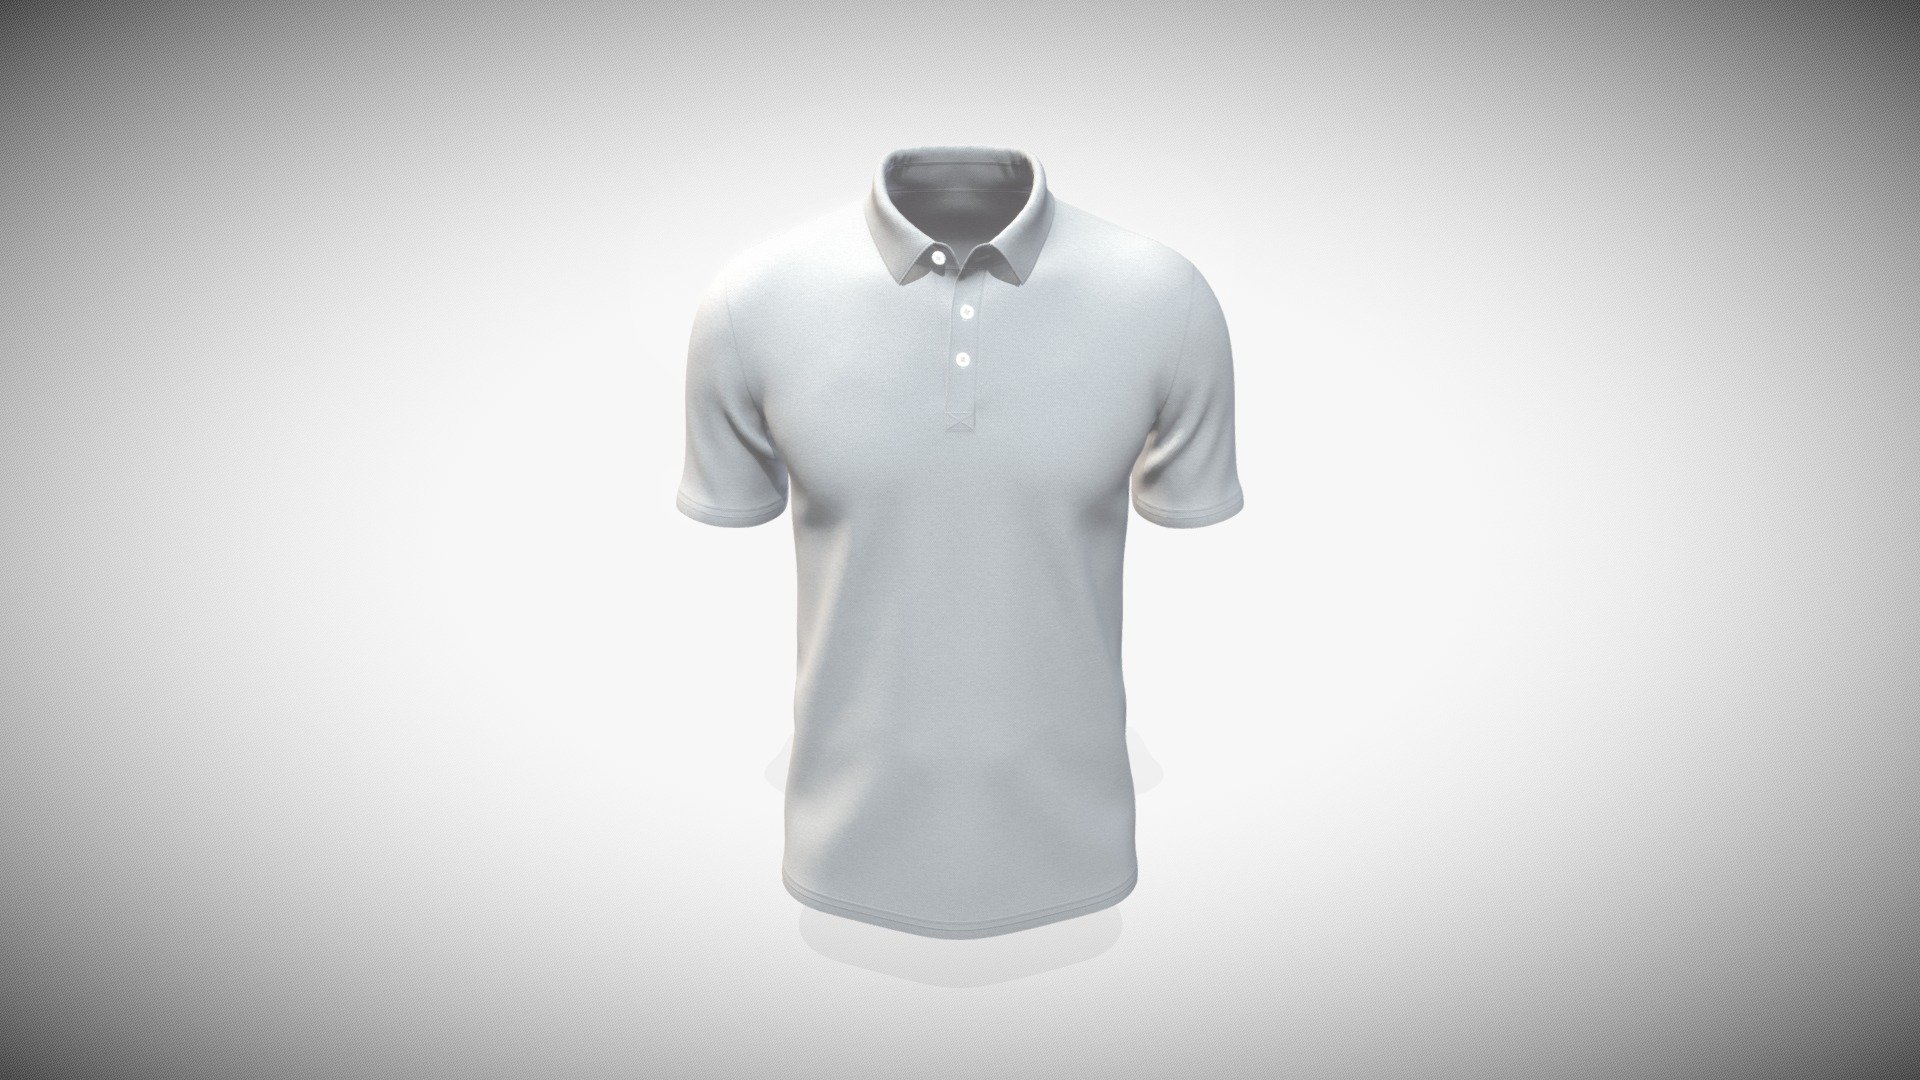 Cloth Title = Men's Regular-Fit Quick-Dry Golf Polo 

SKU = DG100045 

Category = Men 

Product Type = Polo 

Cloth Length = Regular 

Body Fit = Regular Fit 

Occasion = Casual  

Sleeve Style = Set In Sleeve 


Our Services:

3D Apparel Design.

OBJ,FBX,GLTF Making with High/Low Poly.

Fabric Digitalization.

Mockup making.

3D Teck Pack.

Pattern Making

2D Illustration

Cloth Animation and 360 Spin Video


Contact us:- 

Email: info@digitalfashionwear.com 

Website: https://digitalfashionwear.com 

WhatsApp No: +8801759350445 


We designed all the types of cloth specially focused on product visualization, e-commerce, fitting, and production. 

We will design: 

T-shirts 

Polo shirts 

Hoodies 

Sweatshirt 

Jackets 

Shirts 

TankTops 

Trousers 

Bras 

Underwear 

Blazer 

Aprons 

Leggings 

and All Fashion items. 





Our goal is to make sure what we provide you, meets your demand 3d model